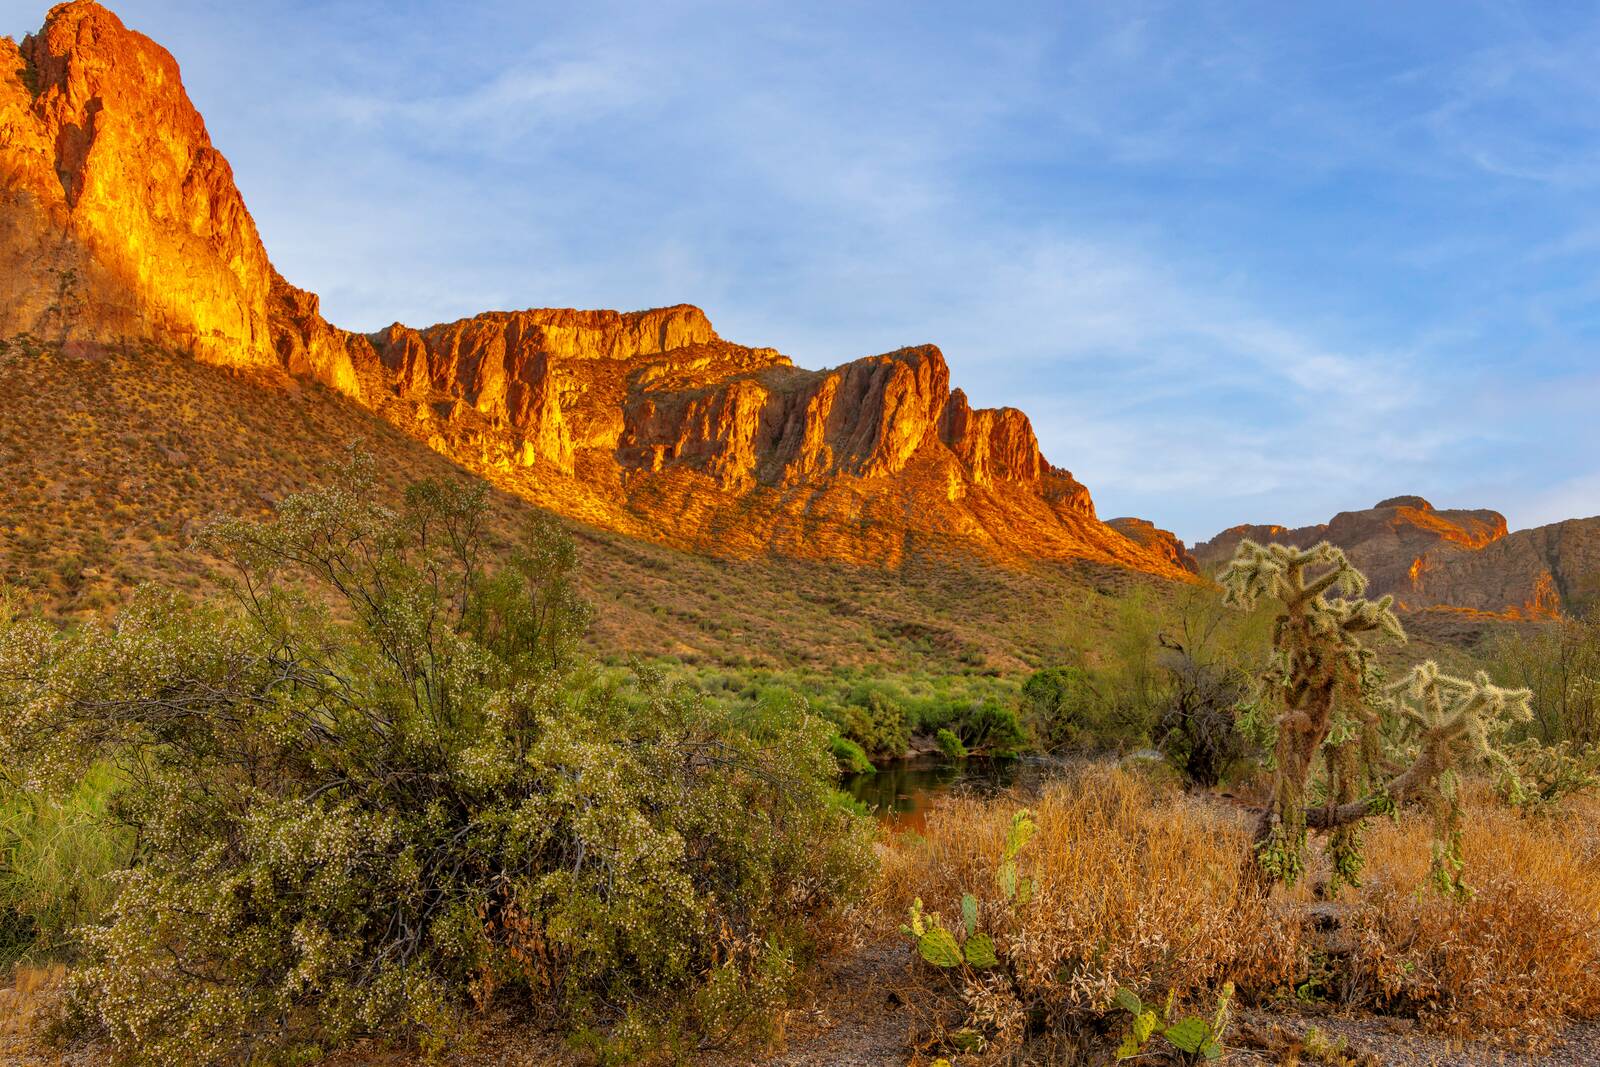 Image of Lower Salt River rock formations by Rob Cady